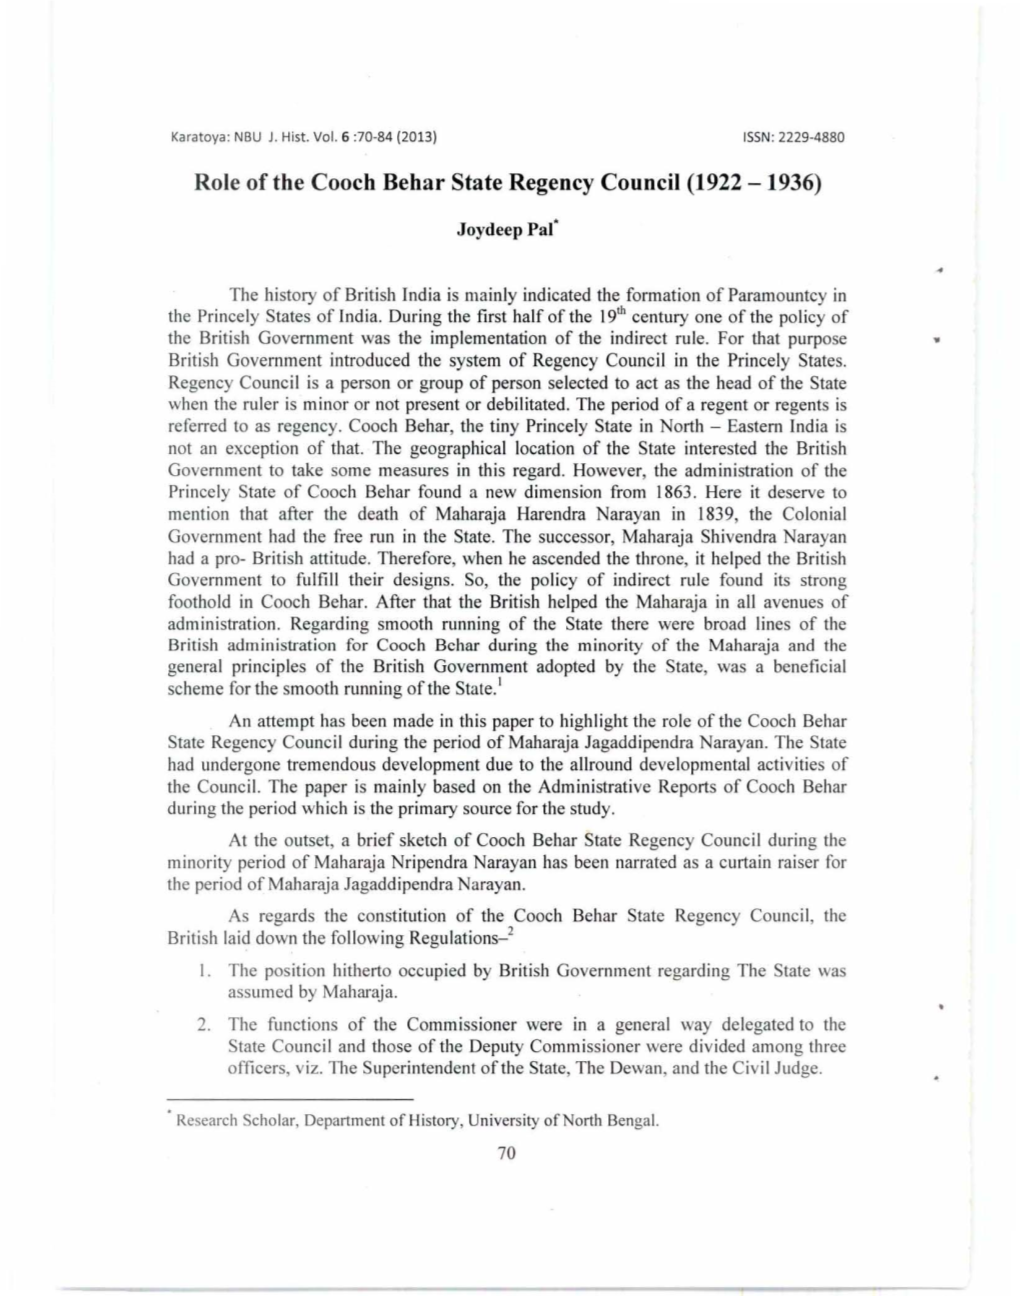 Role of the Cooch Behar State Regency Council (1922 - 1936)